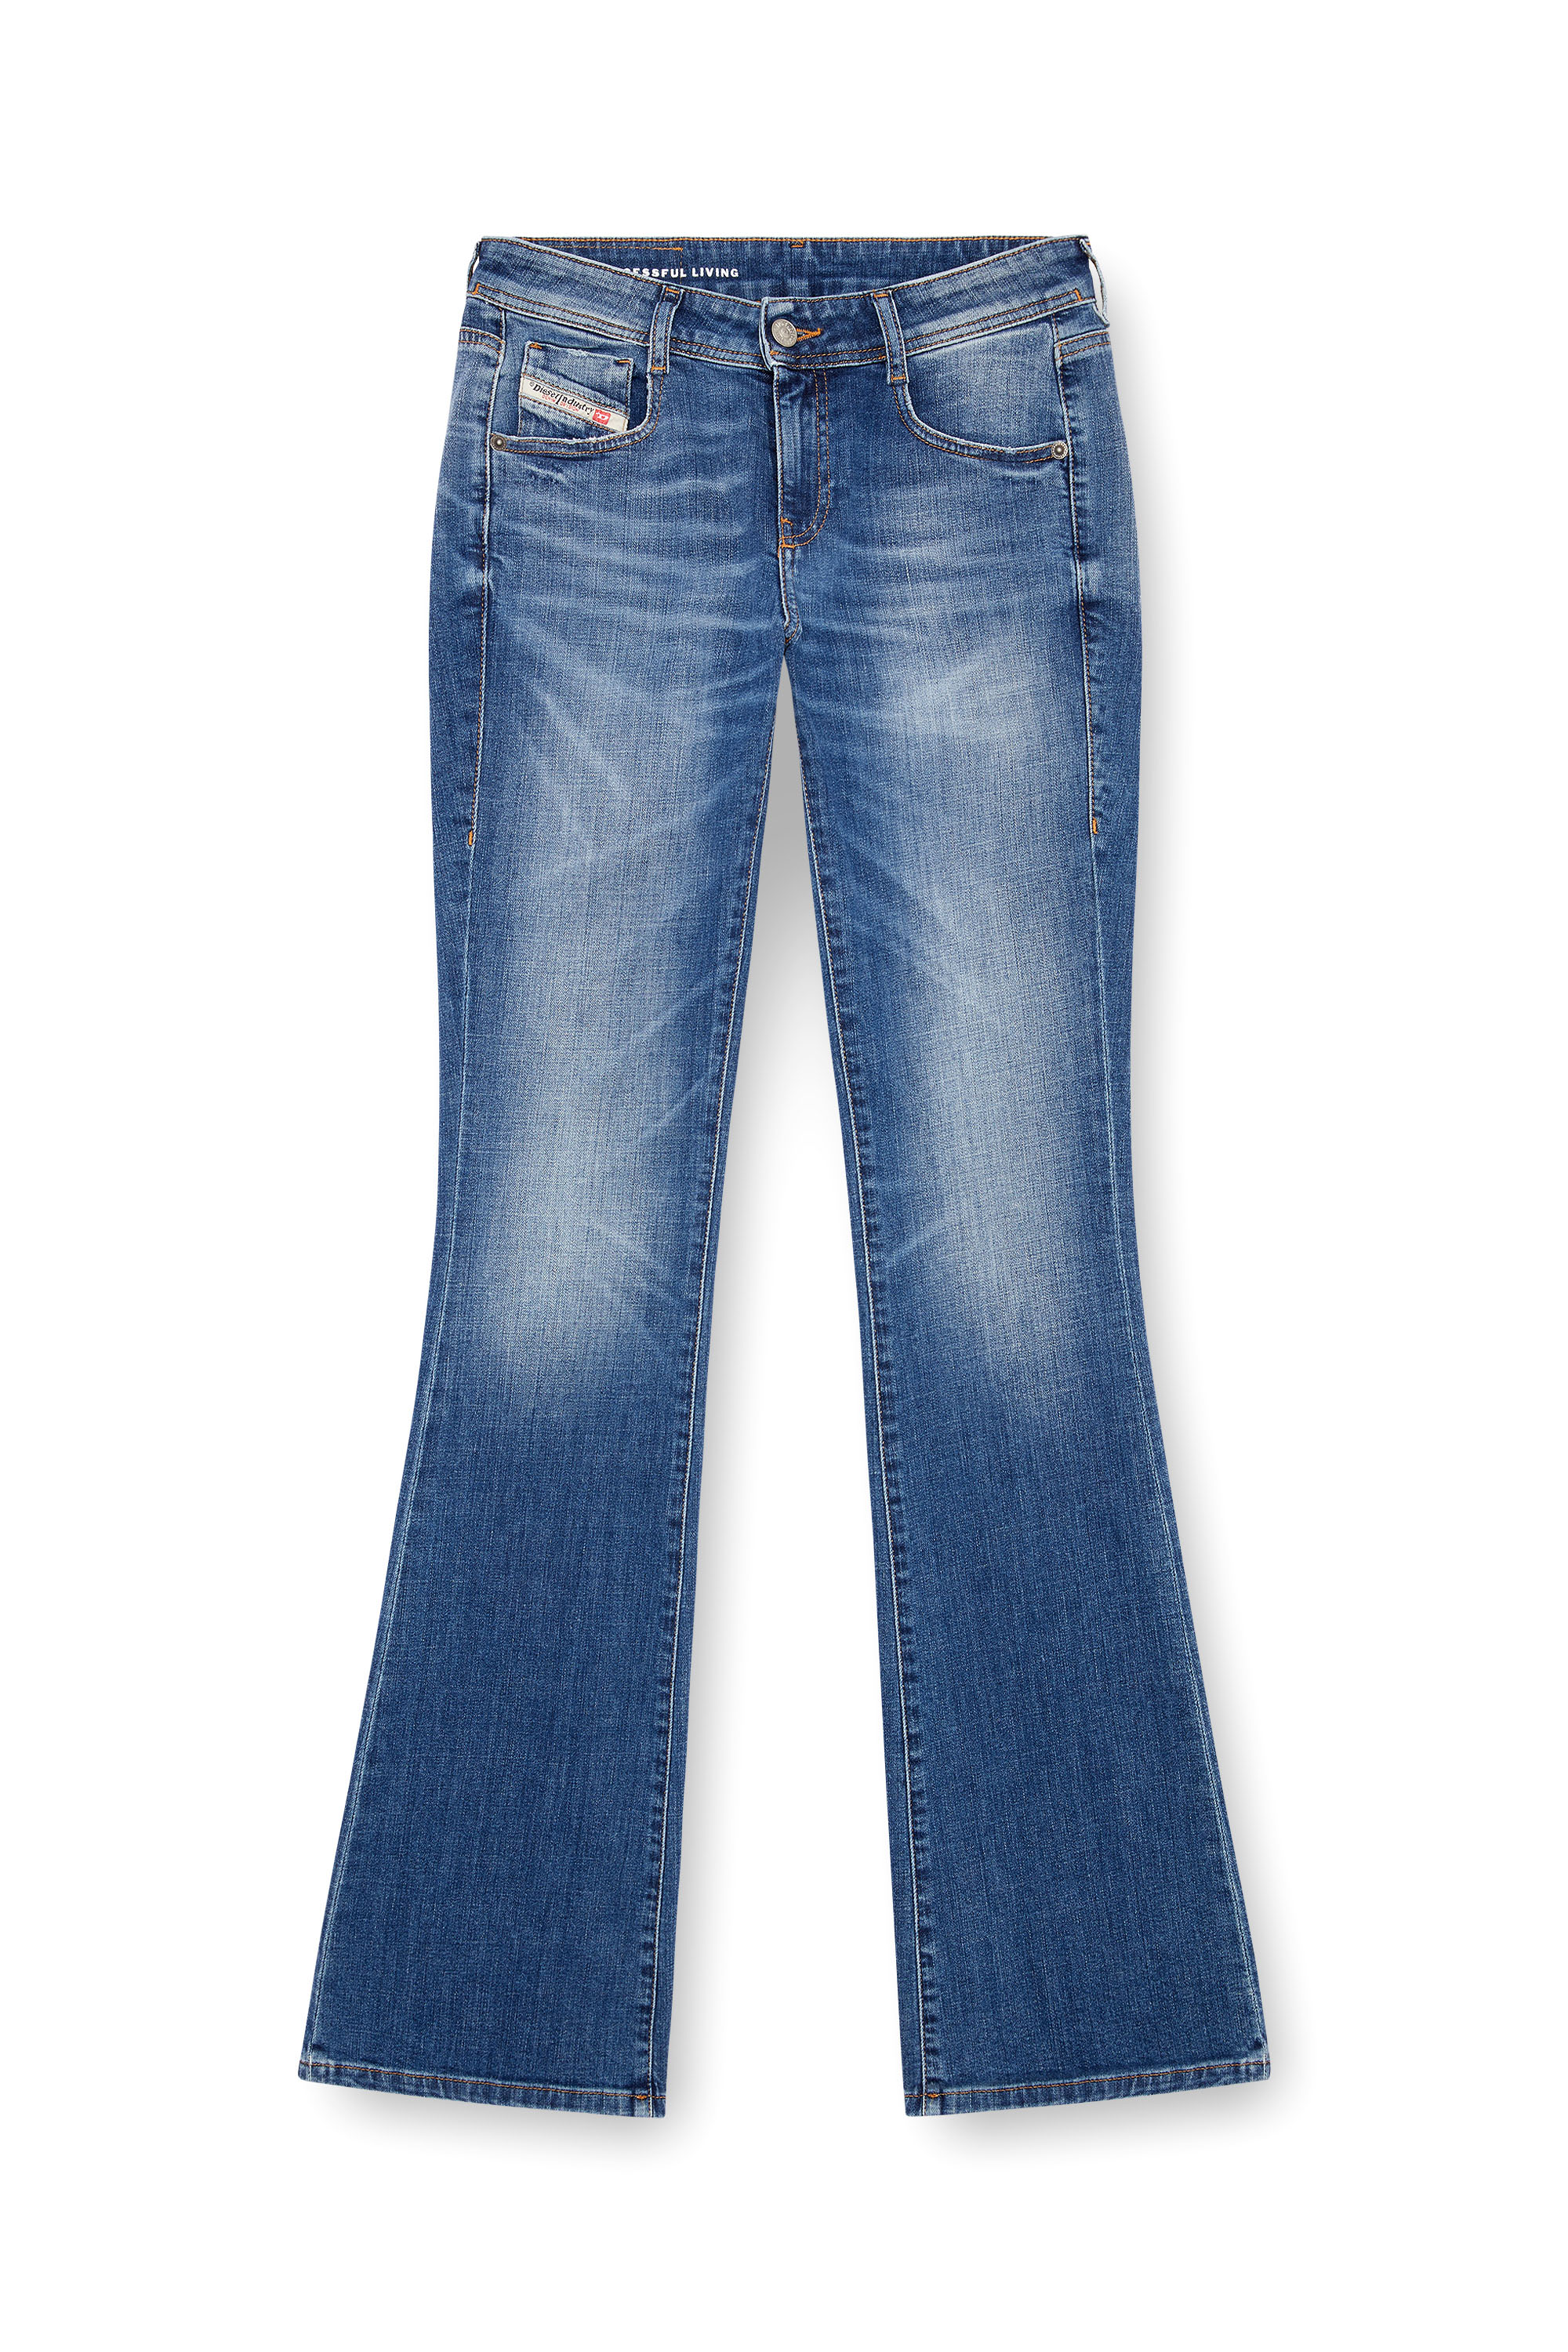 Diesel - Bootcut and Flare Jeans 1969 D-Ebbey 09J33, Mujer Bootcut y Flare Jeans - 1969 D-Ebbey in Azul marino - Image 5